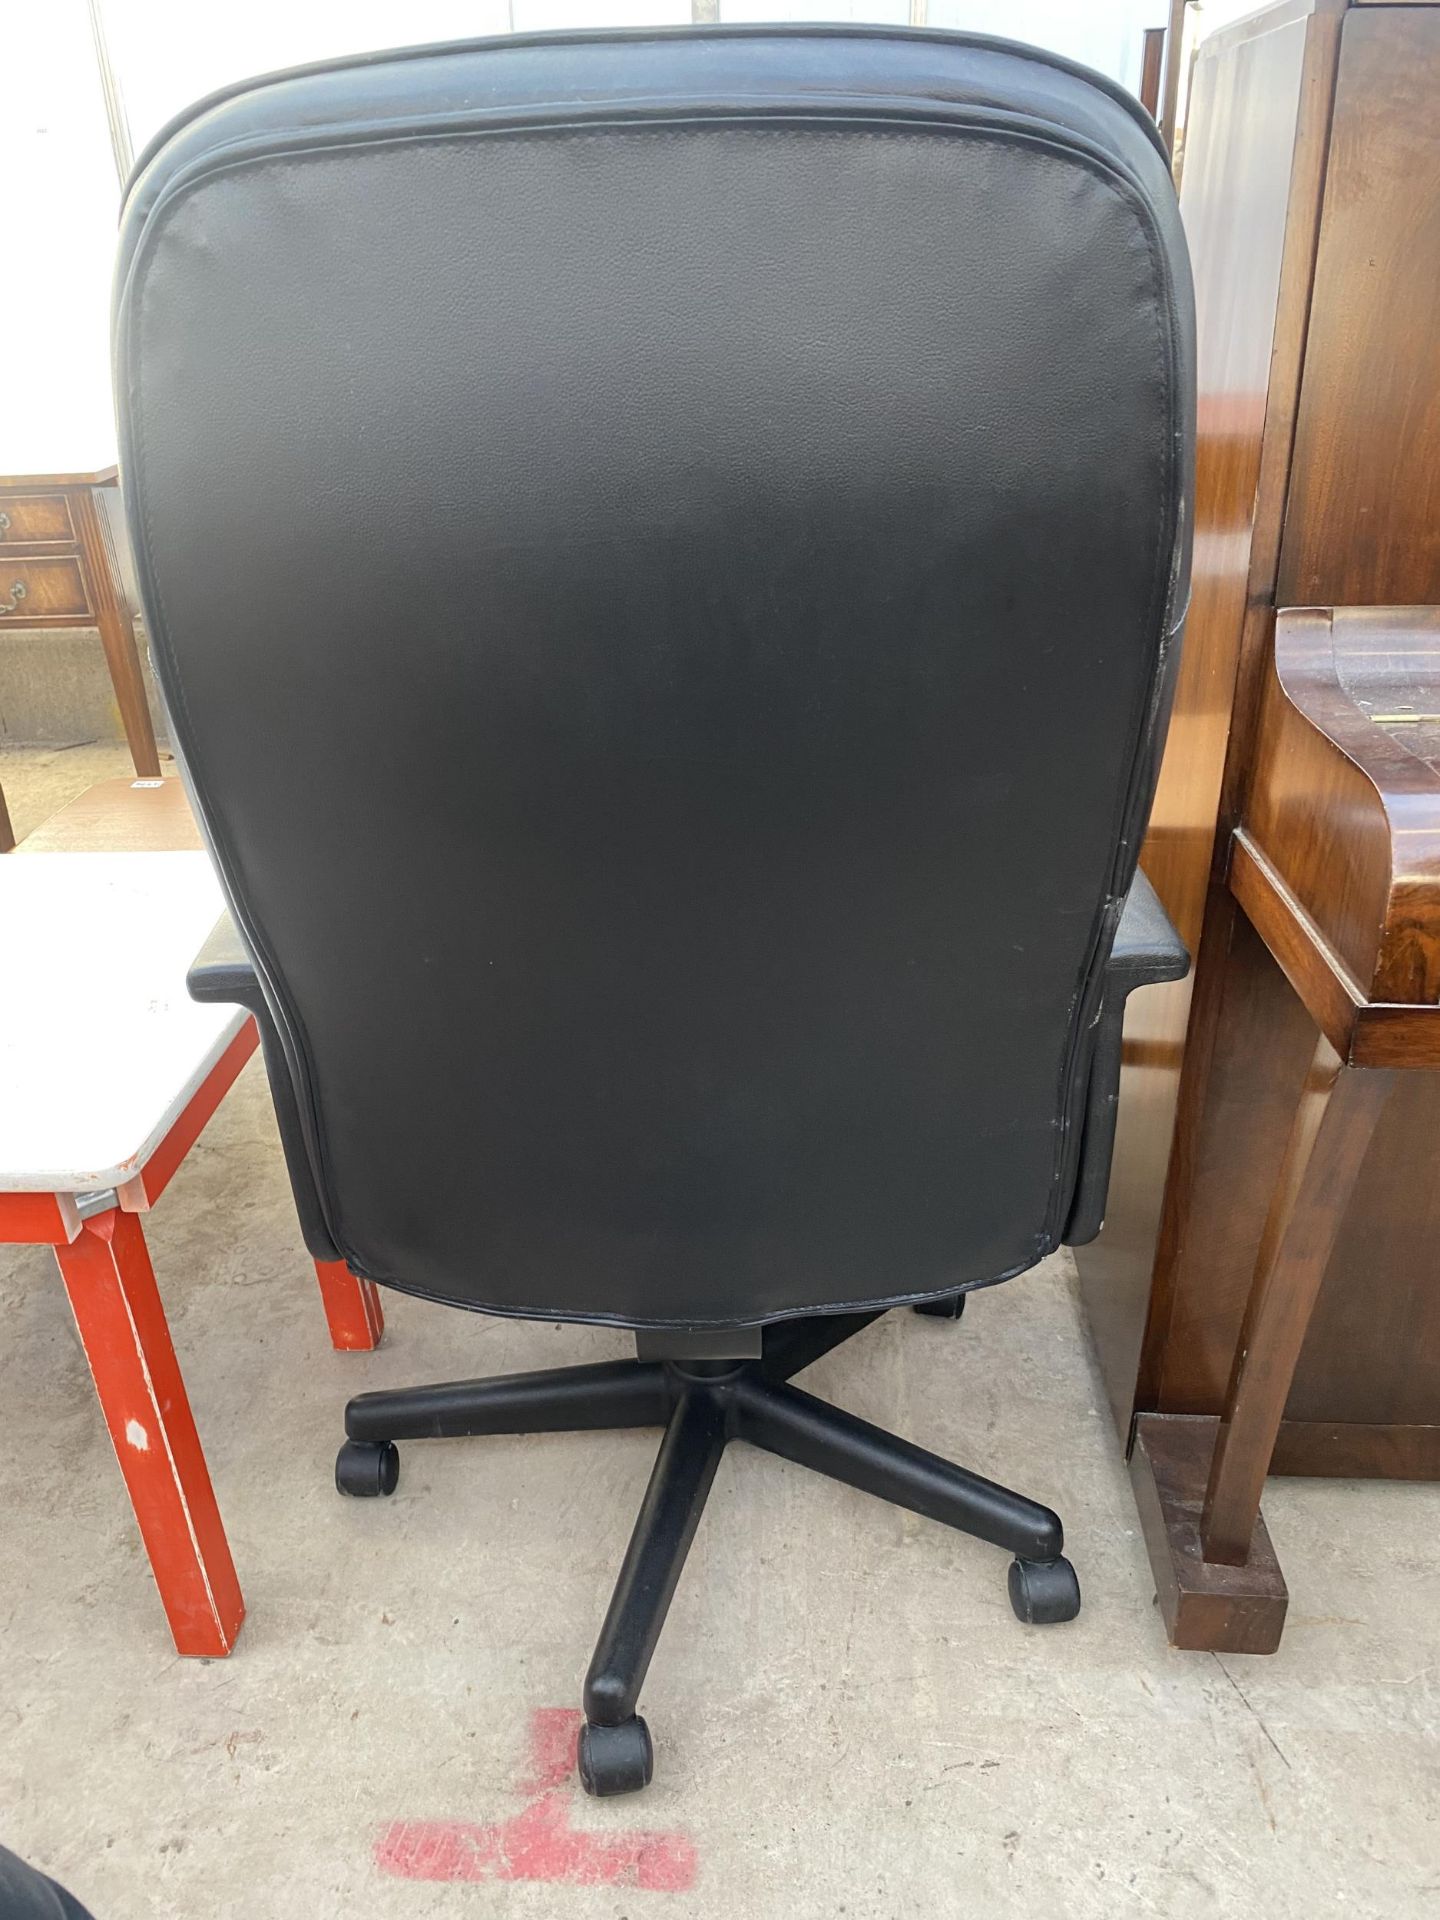 A MODERN BLACK OFFICE SWIVEL ARM CHAIR - Image 3 of 3